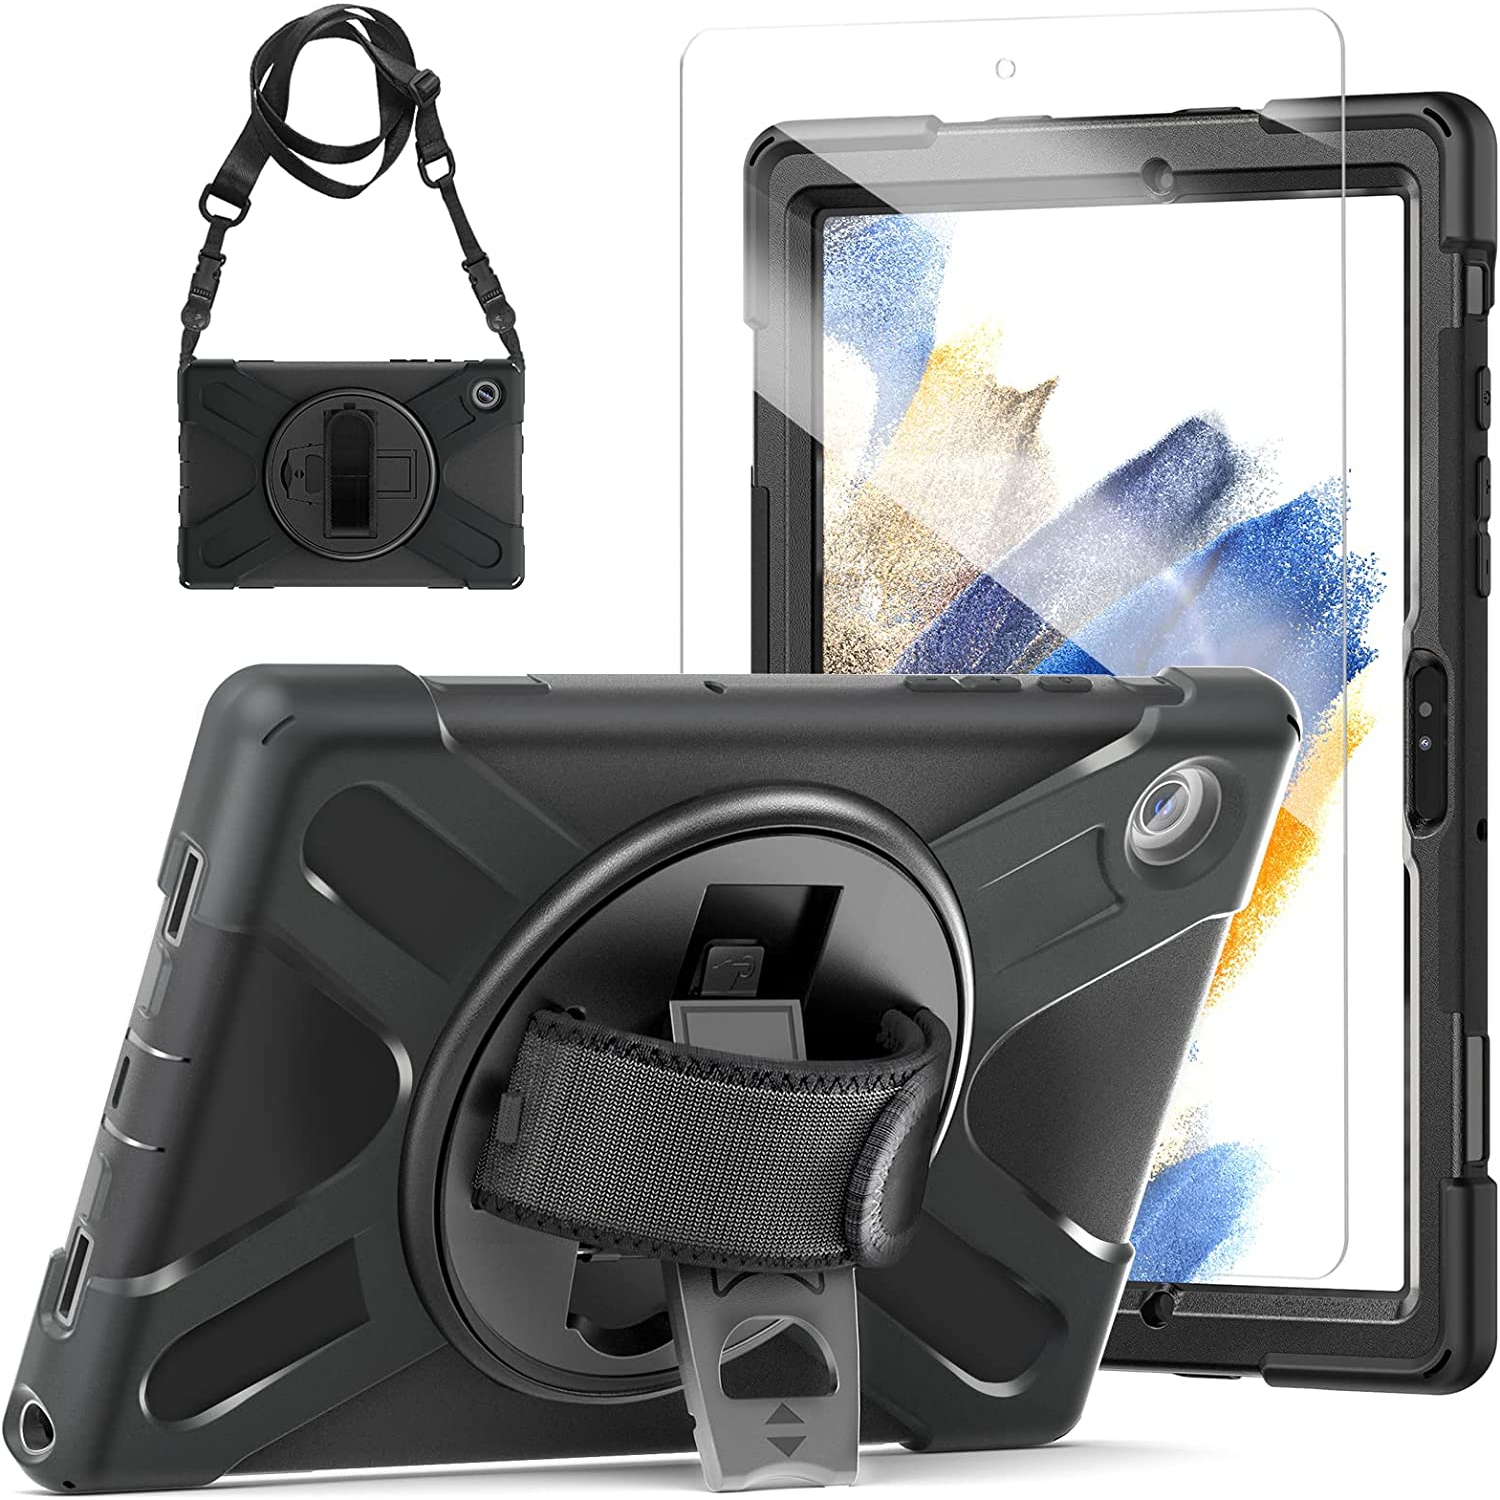 S Samsung Galaxy Tab A8 Case with Screen Protector Galaxy Tab A8 Case 2022 10.5 inch SM-X200/X205/X207 Hard Durable Rugged Protective Tab A8 Cover W/ Stand Strap for Business O